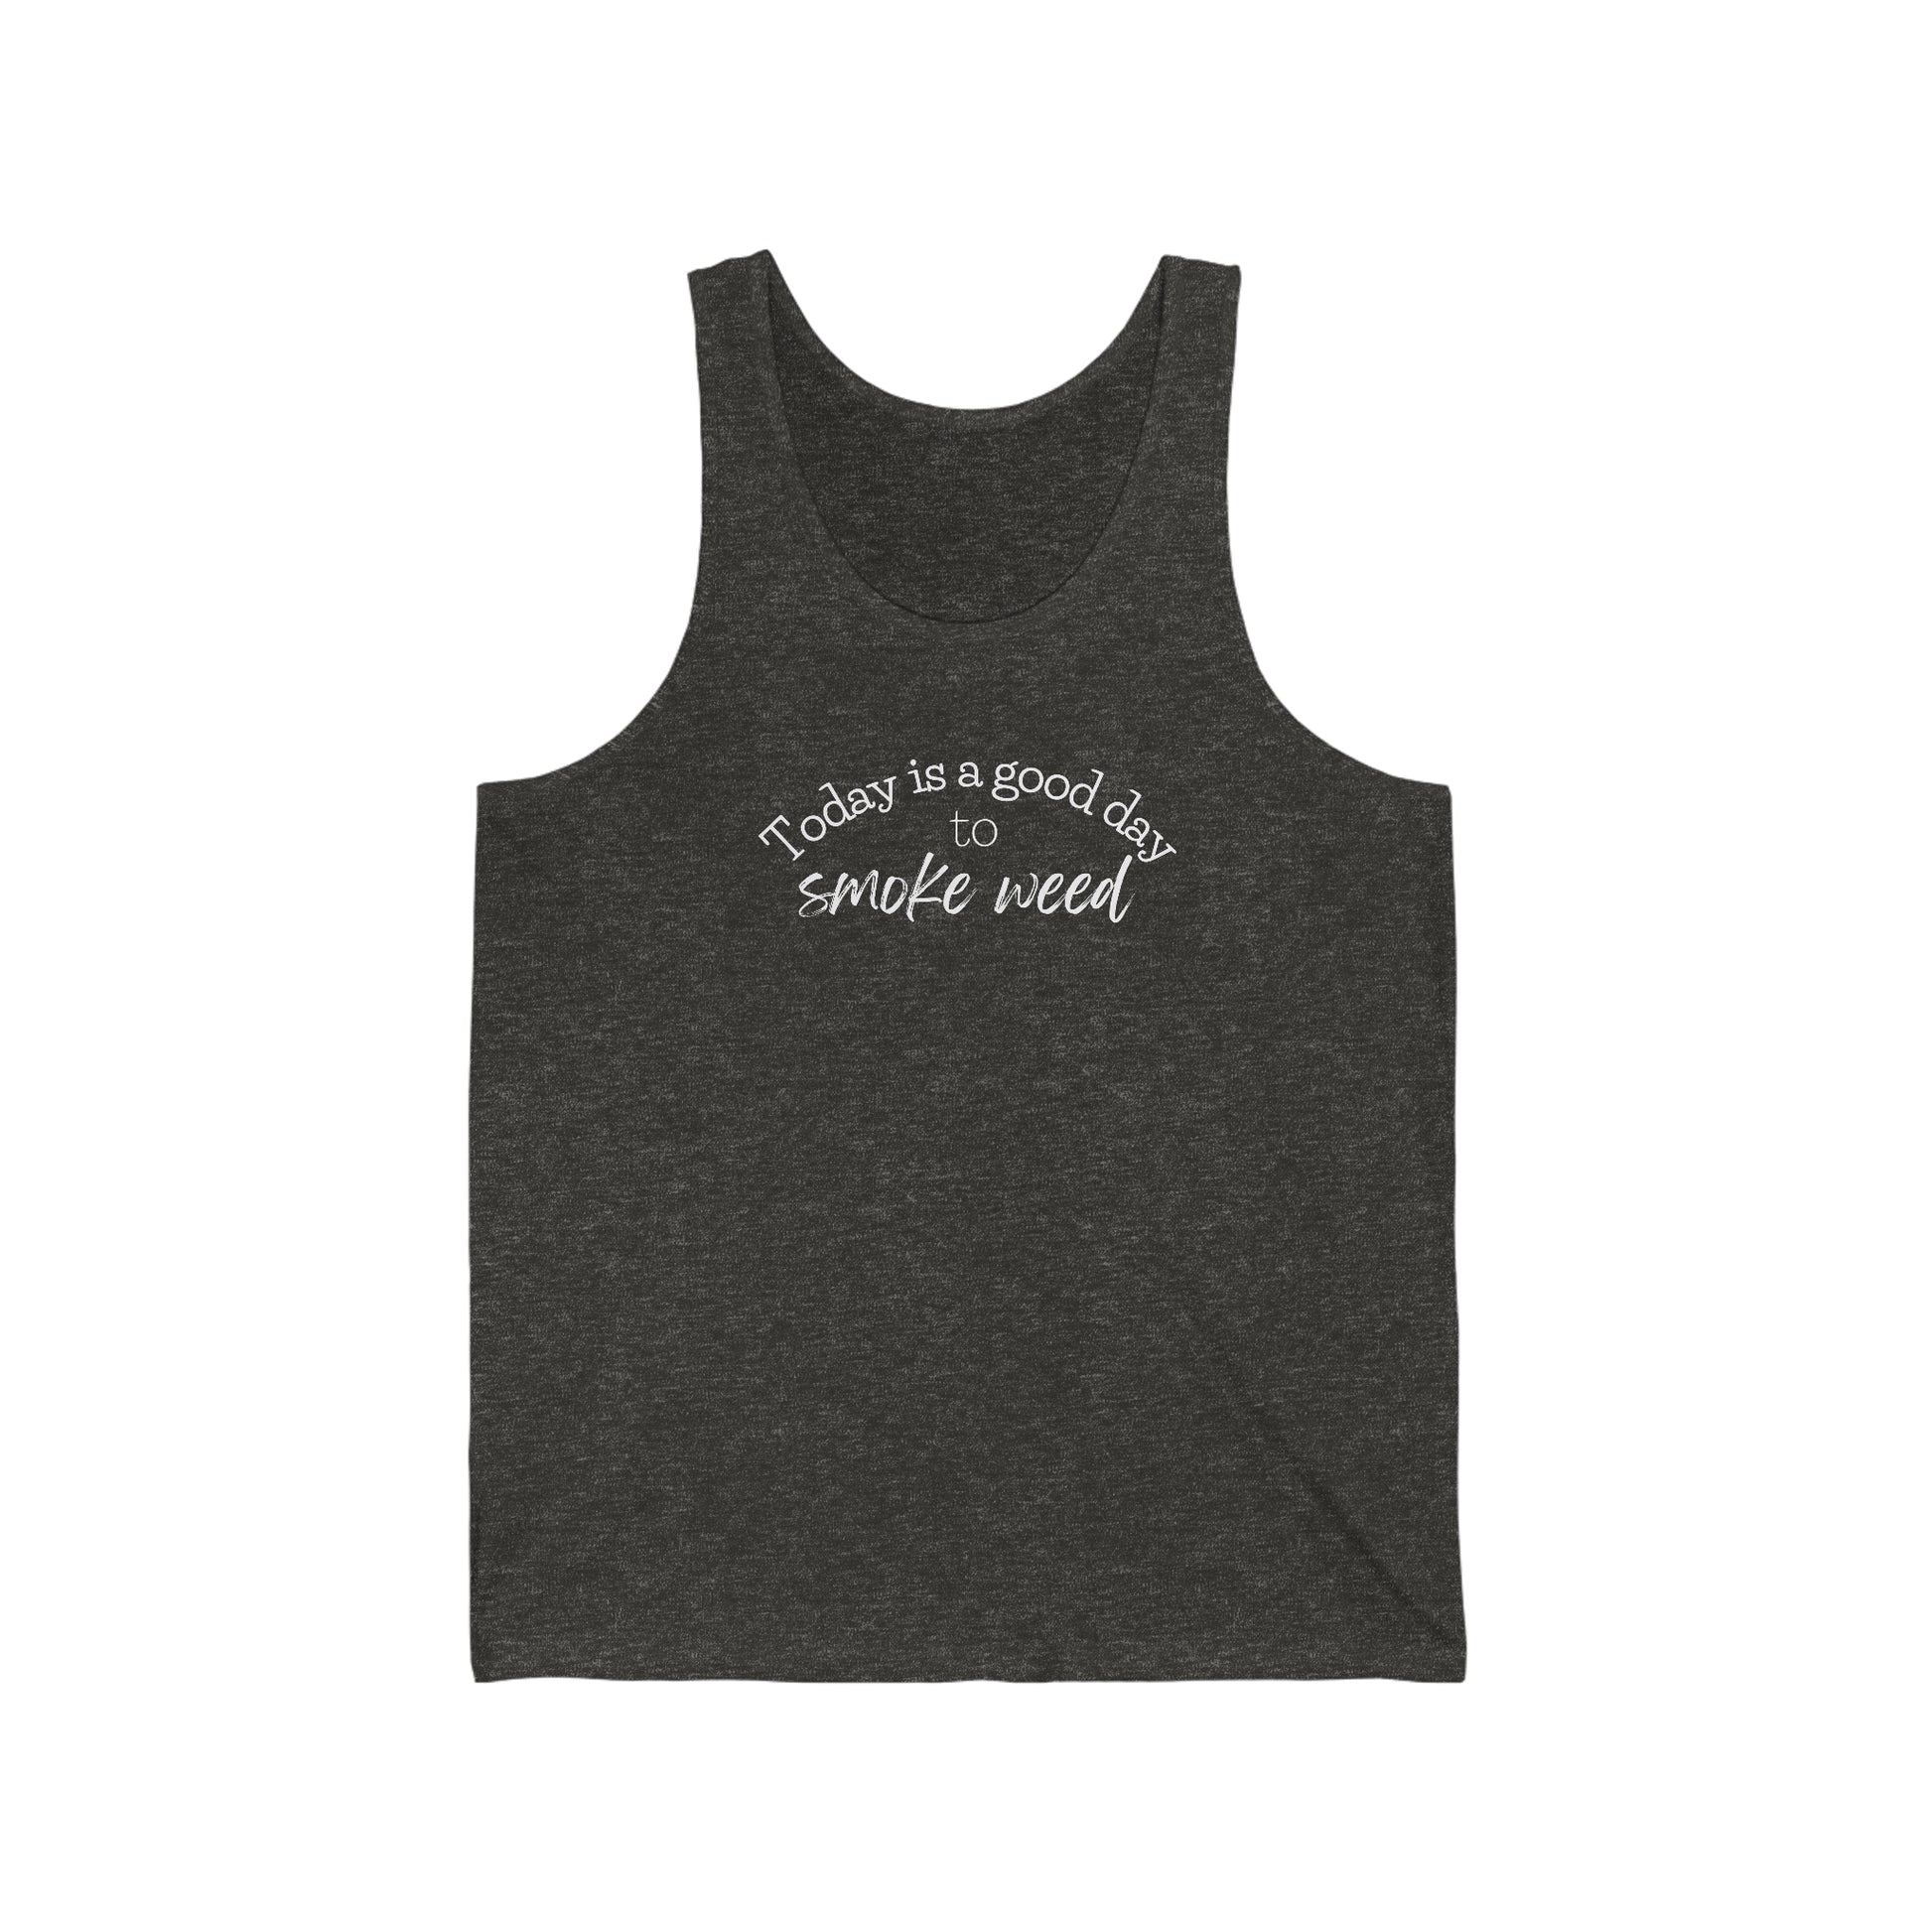 Gray unisex Today is a Good Day to Smoke Weed Cannabis tank top with text printed in white cursive font on the chest area.